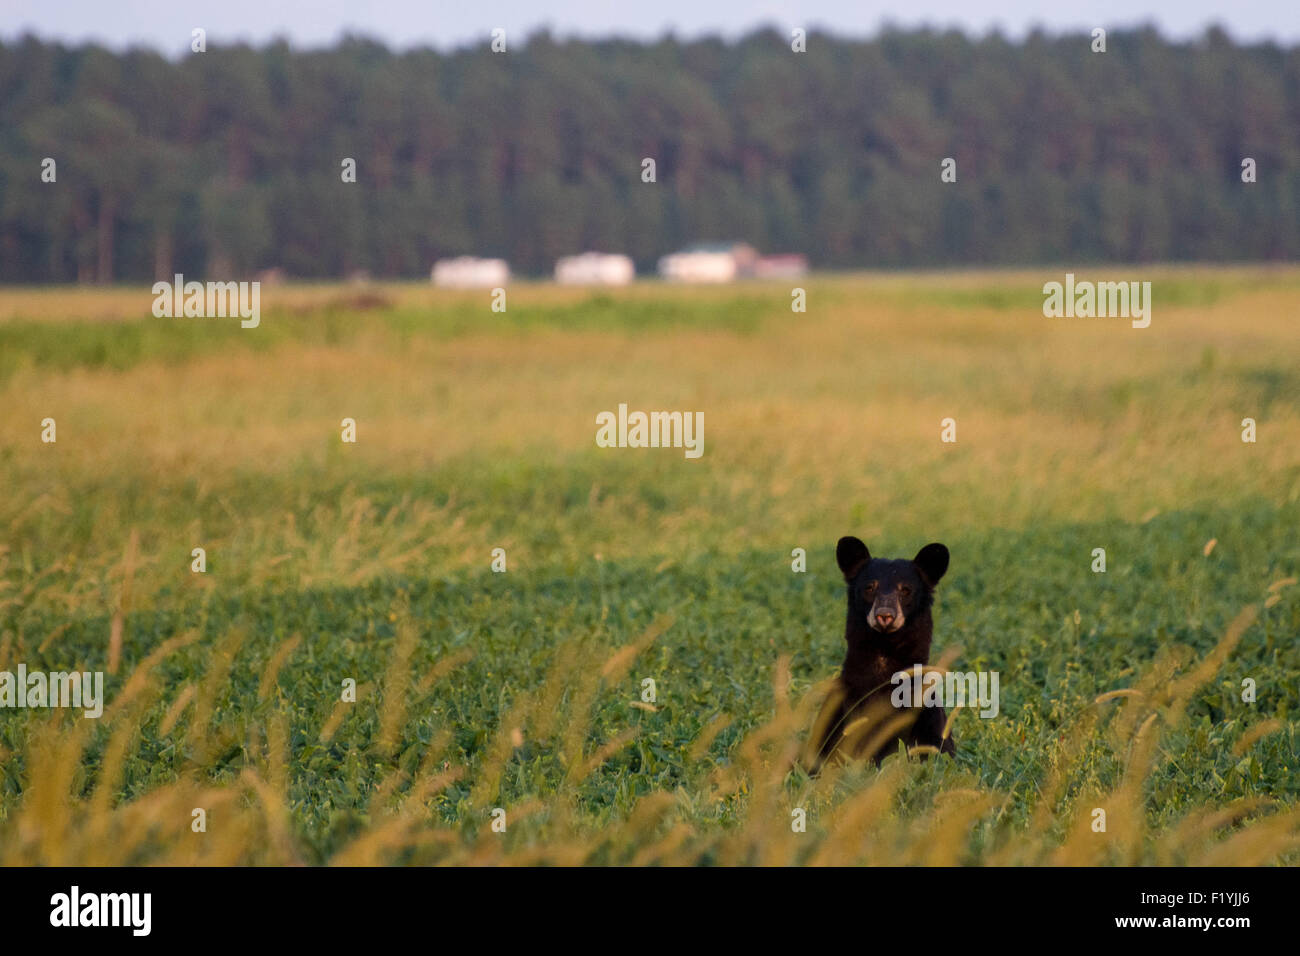 A black bear stands up to take a look in a field in eastern North Carolina. Stock Photo